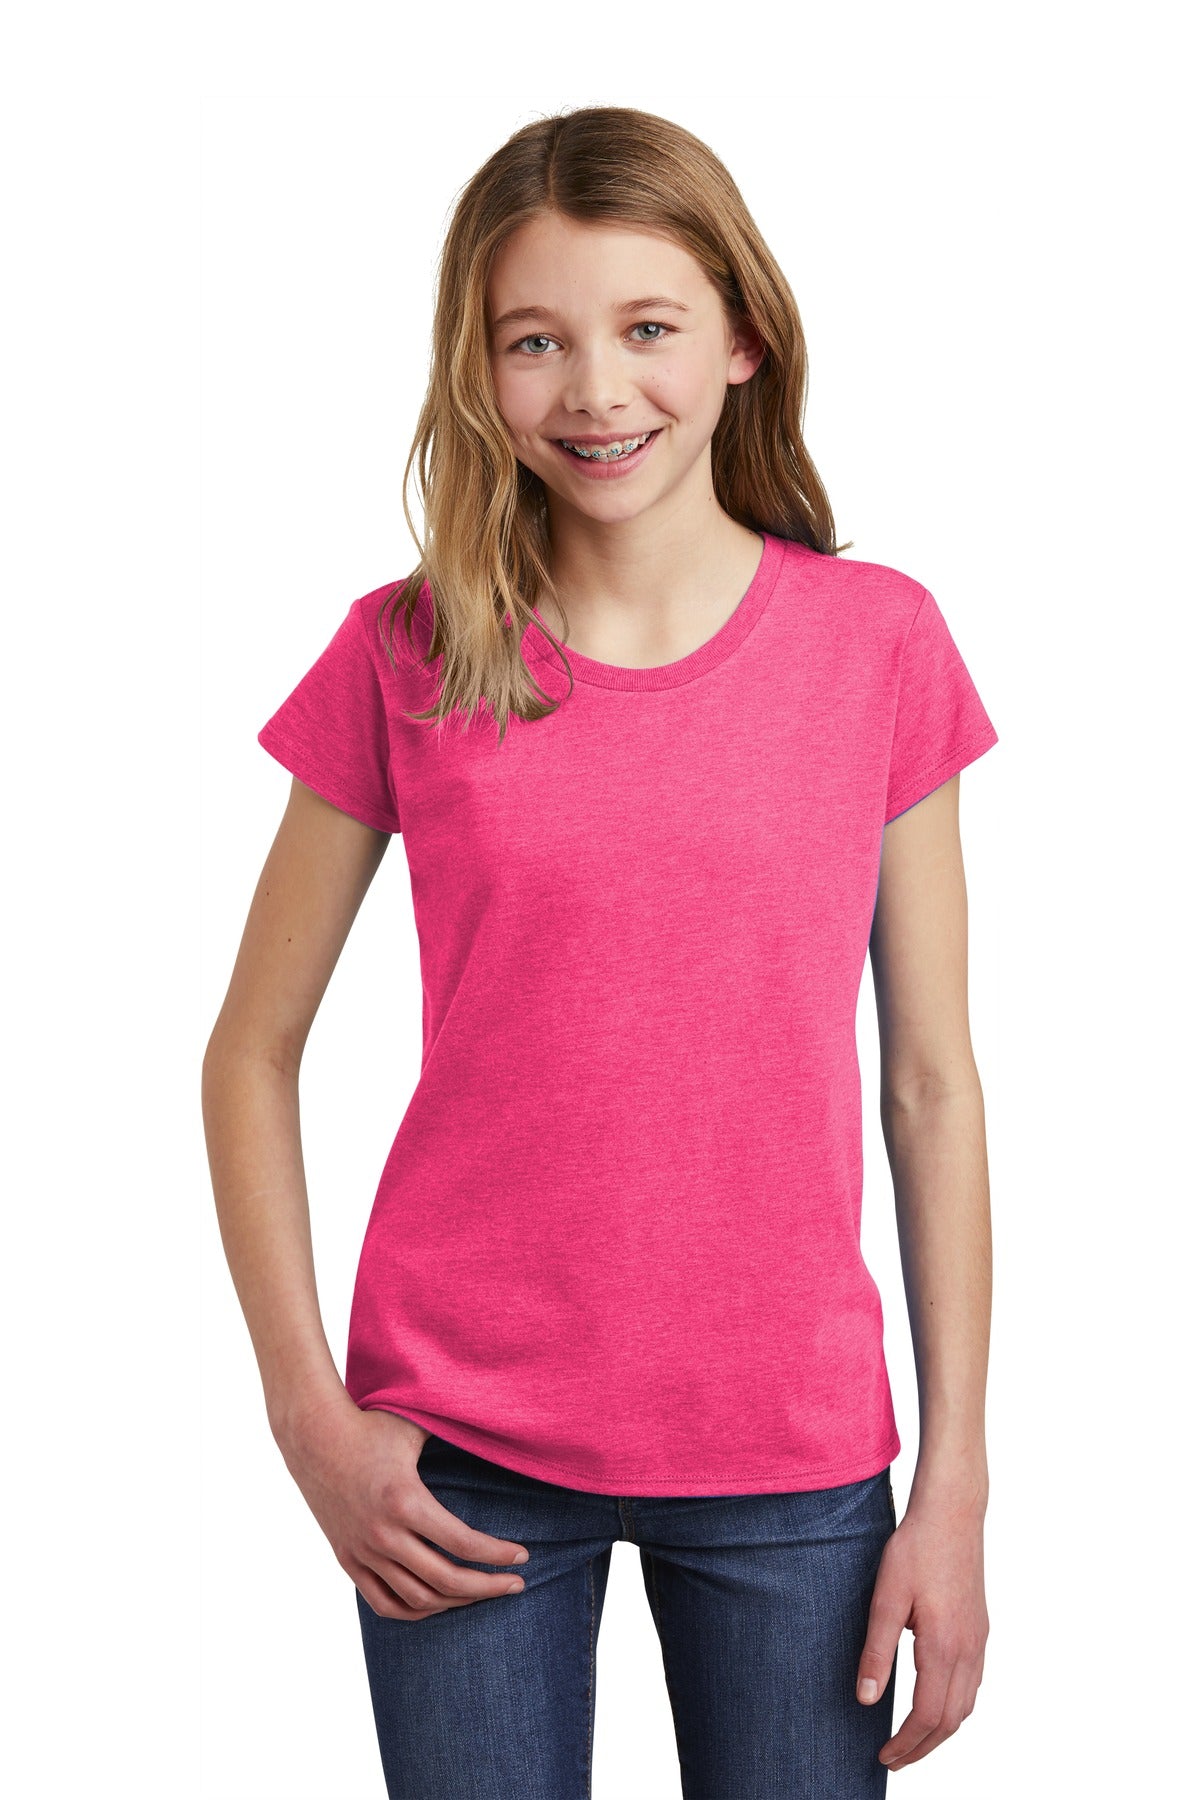 District ® Girls Very Important Tee ® .DT6001YG - DFW Impression